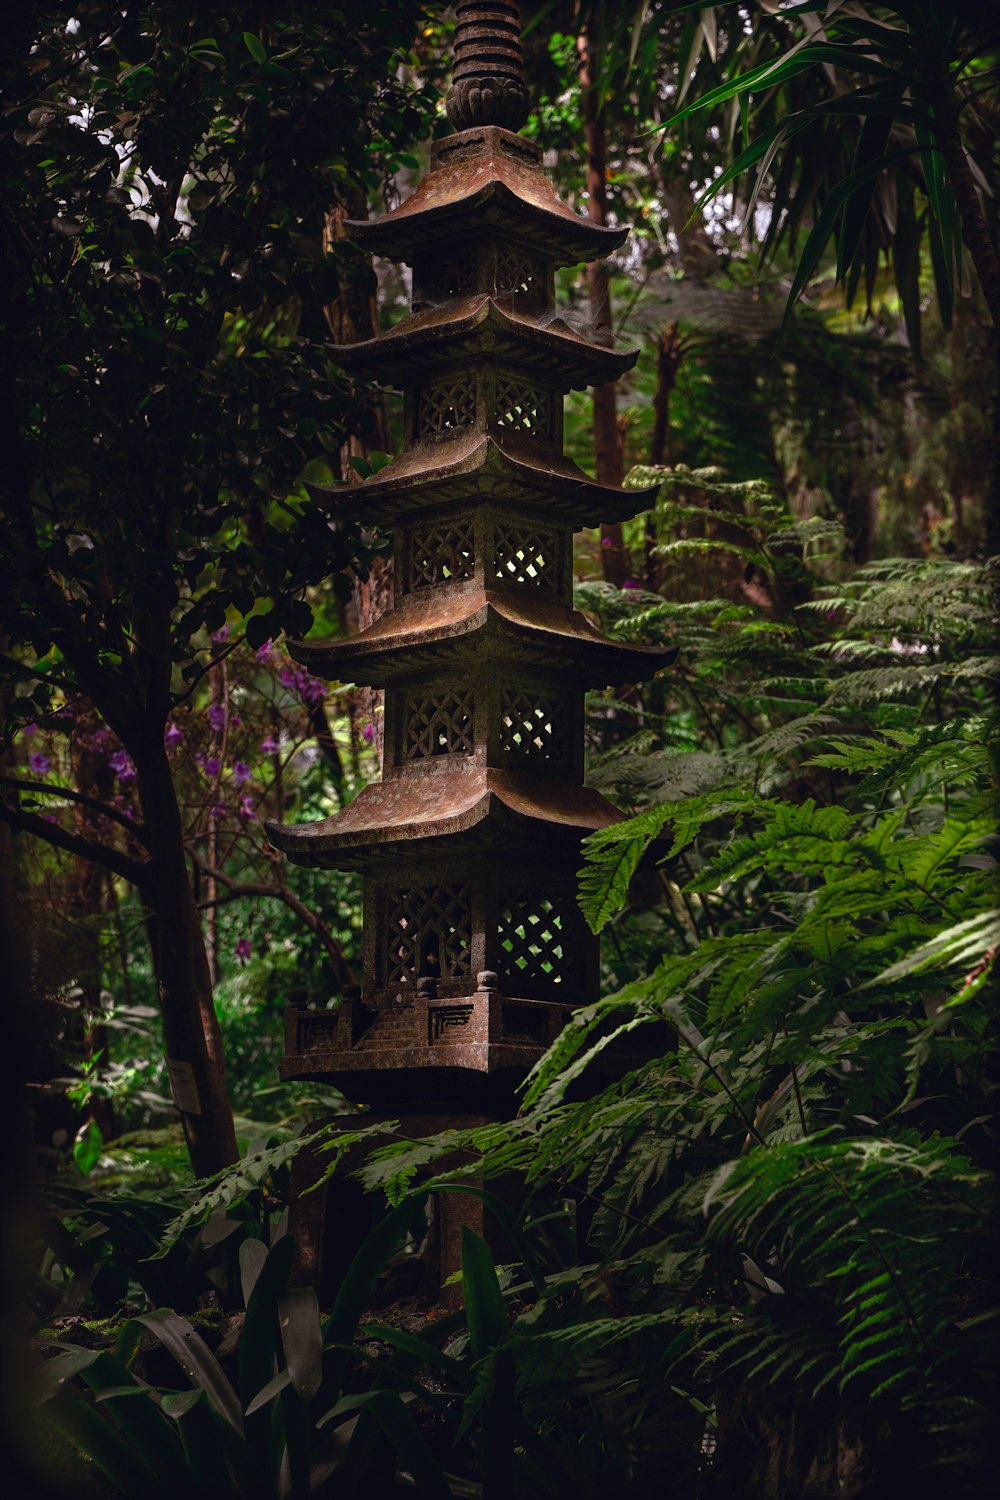 a tall pagoda in the middle of a forest